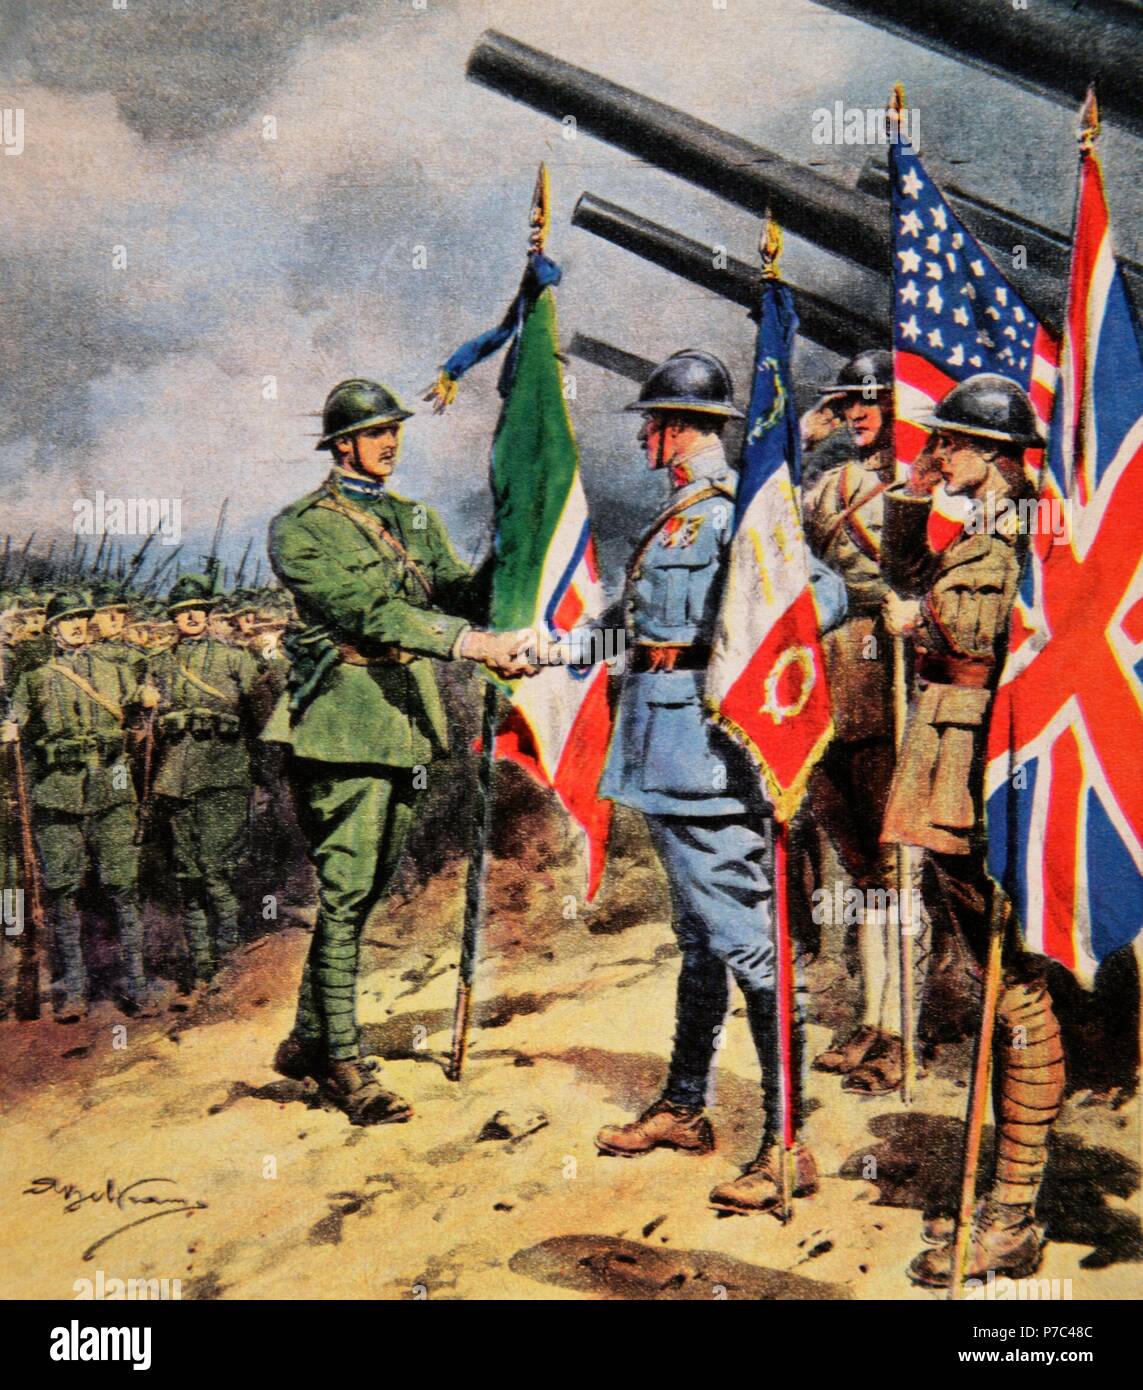 Vittorio Emanuele Orlando (1860-1952). Italian Prime Minister. Meeting between the Allied and the Italian troops, 1918. Engraving of La Domenica del Corriere, Italy. Stock Photo